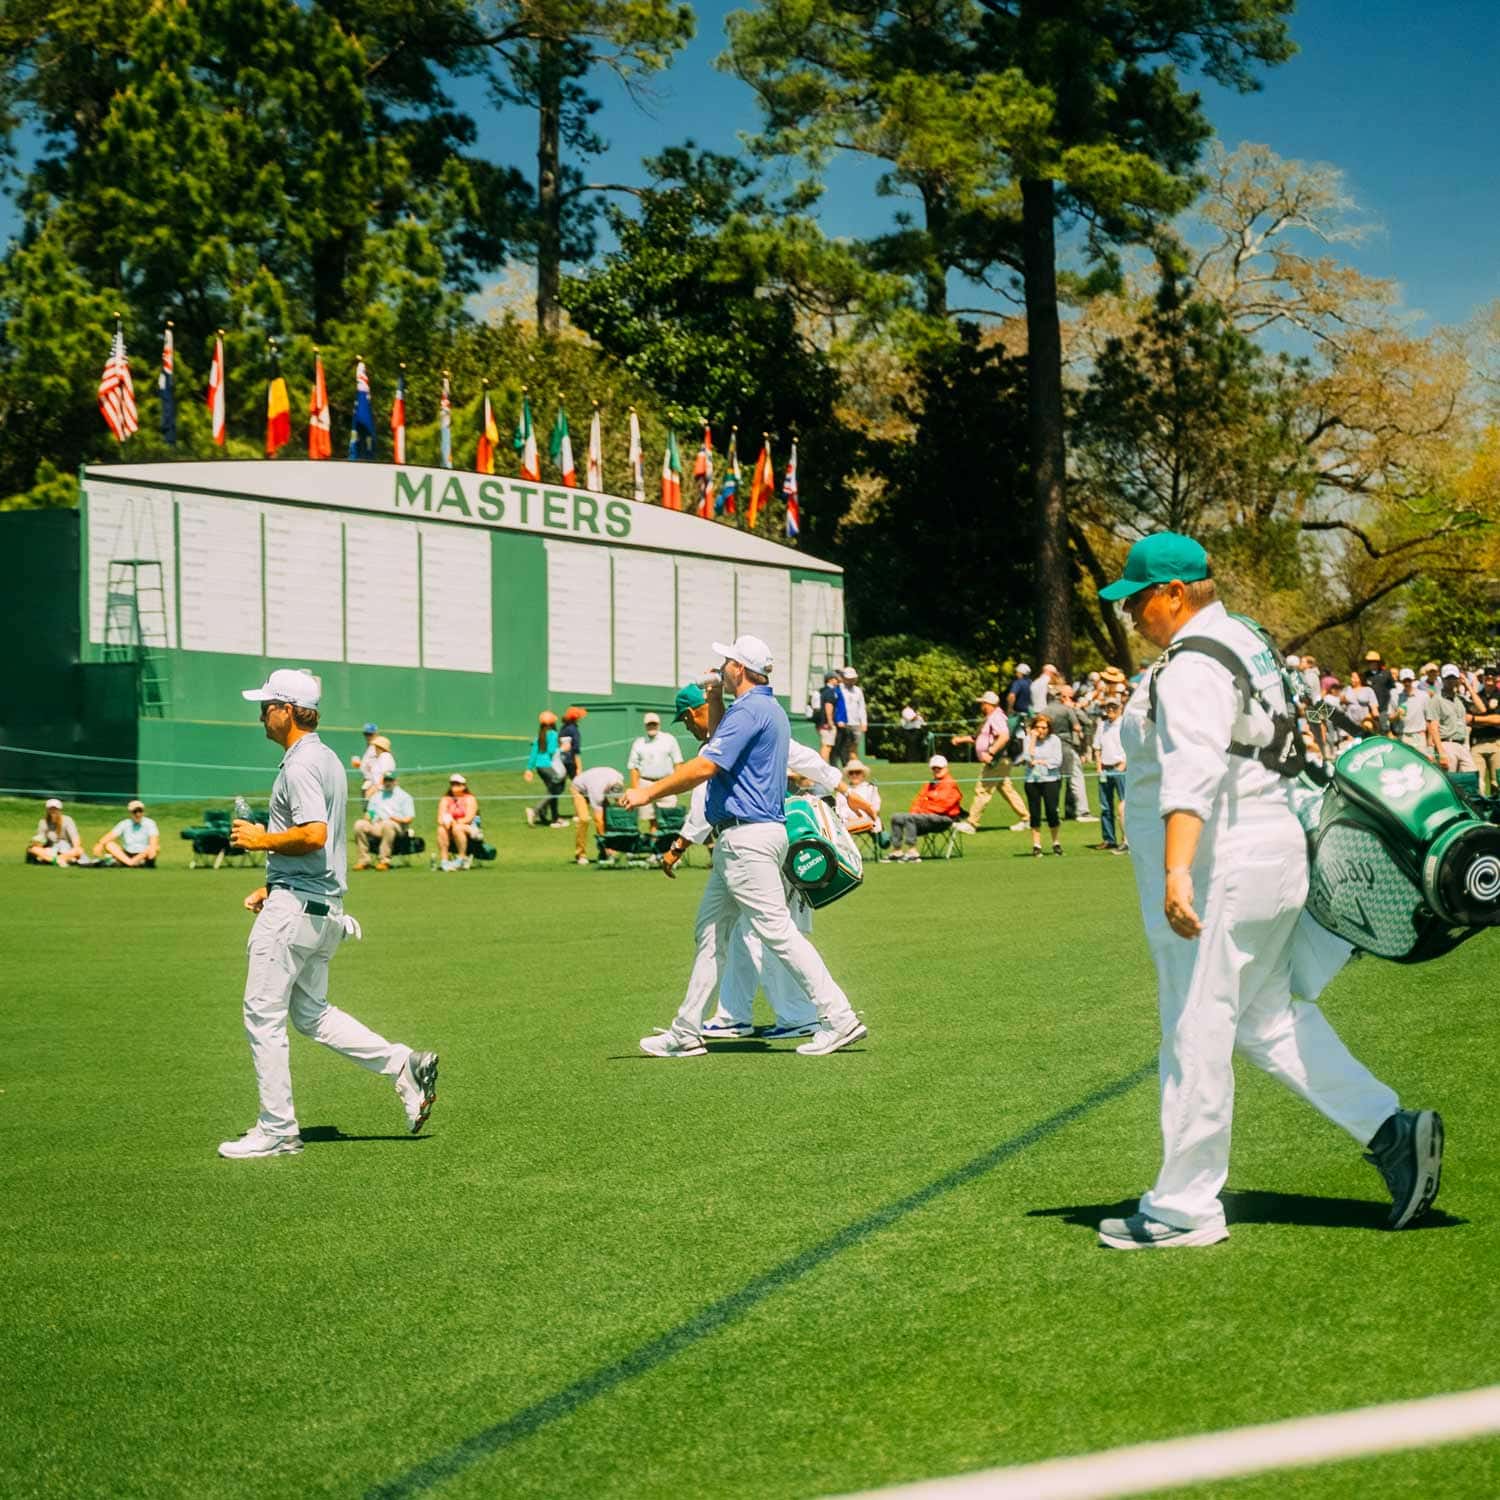 Players Walking at The Masters